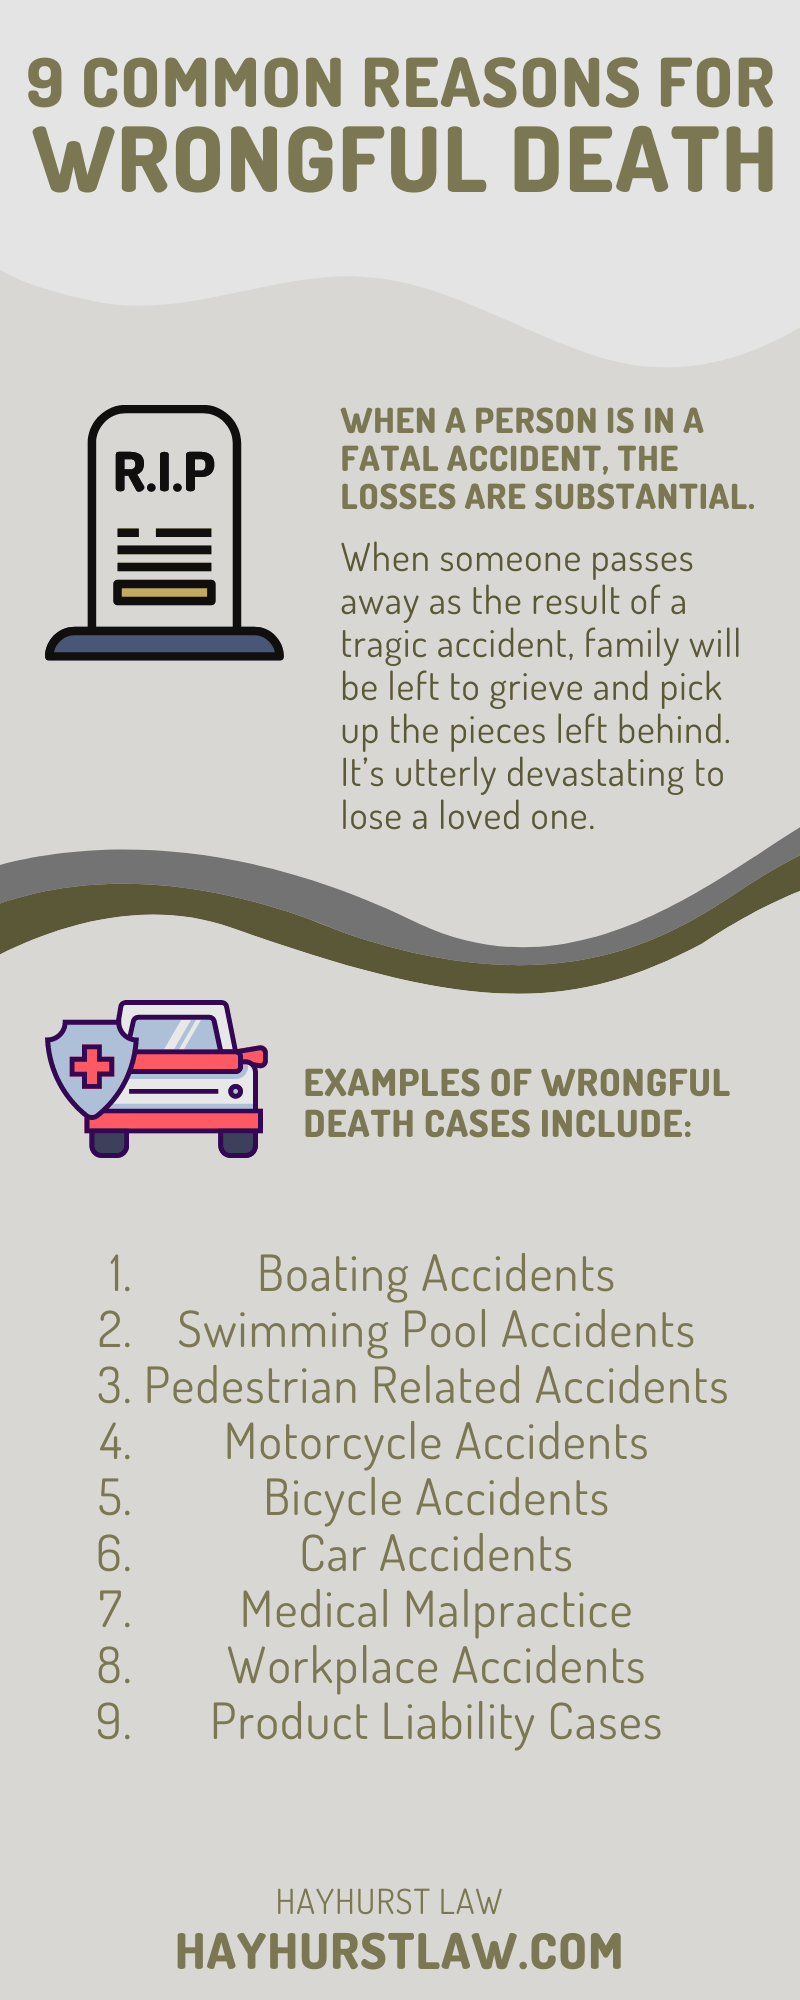 9 common reasons for wrongful death Infographic